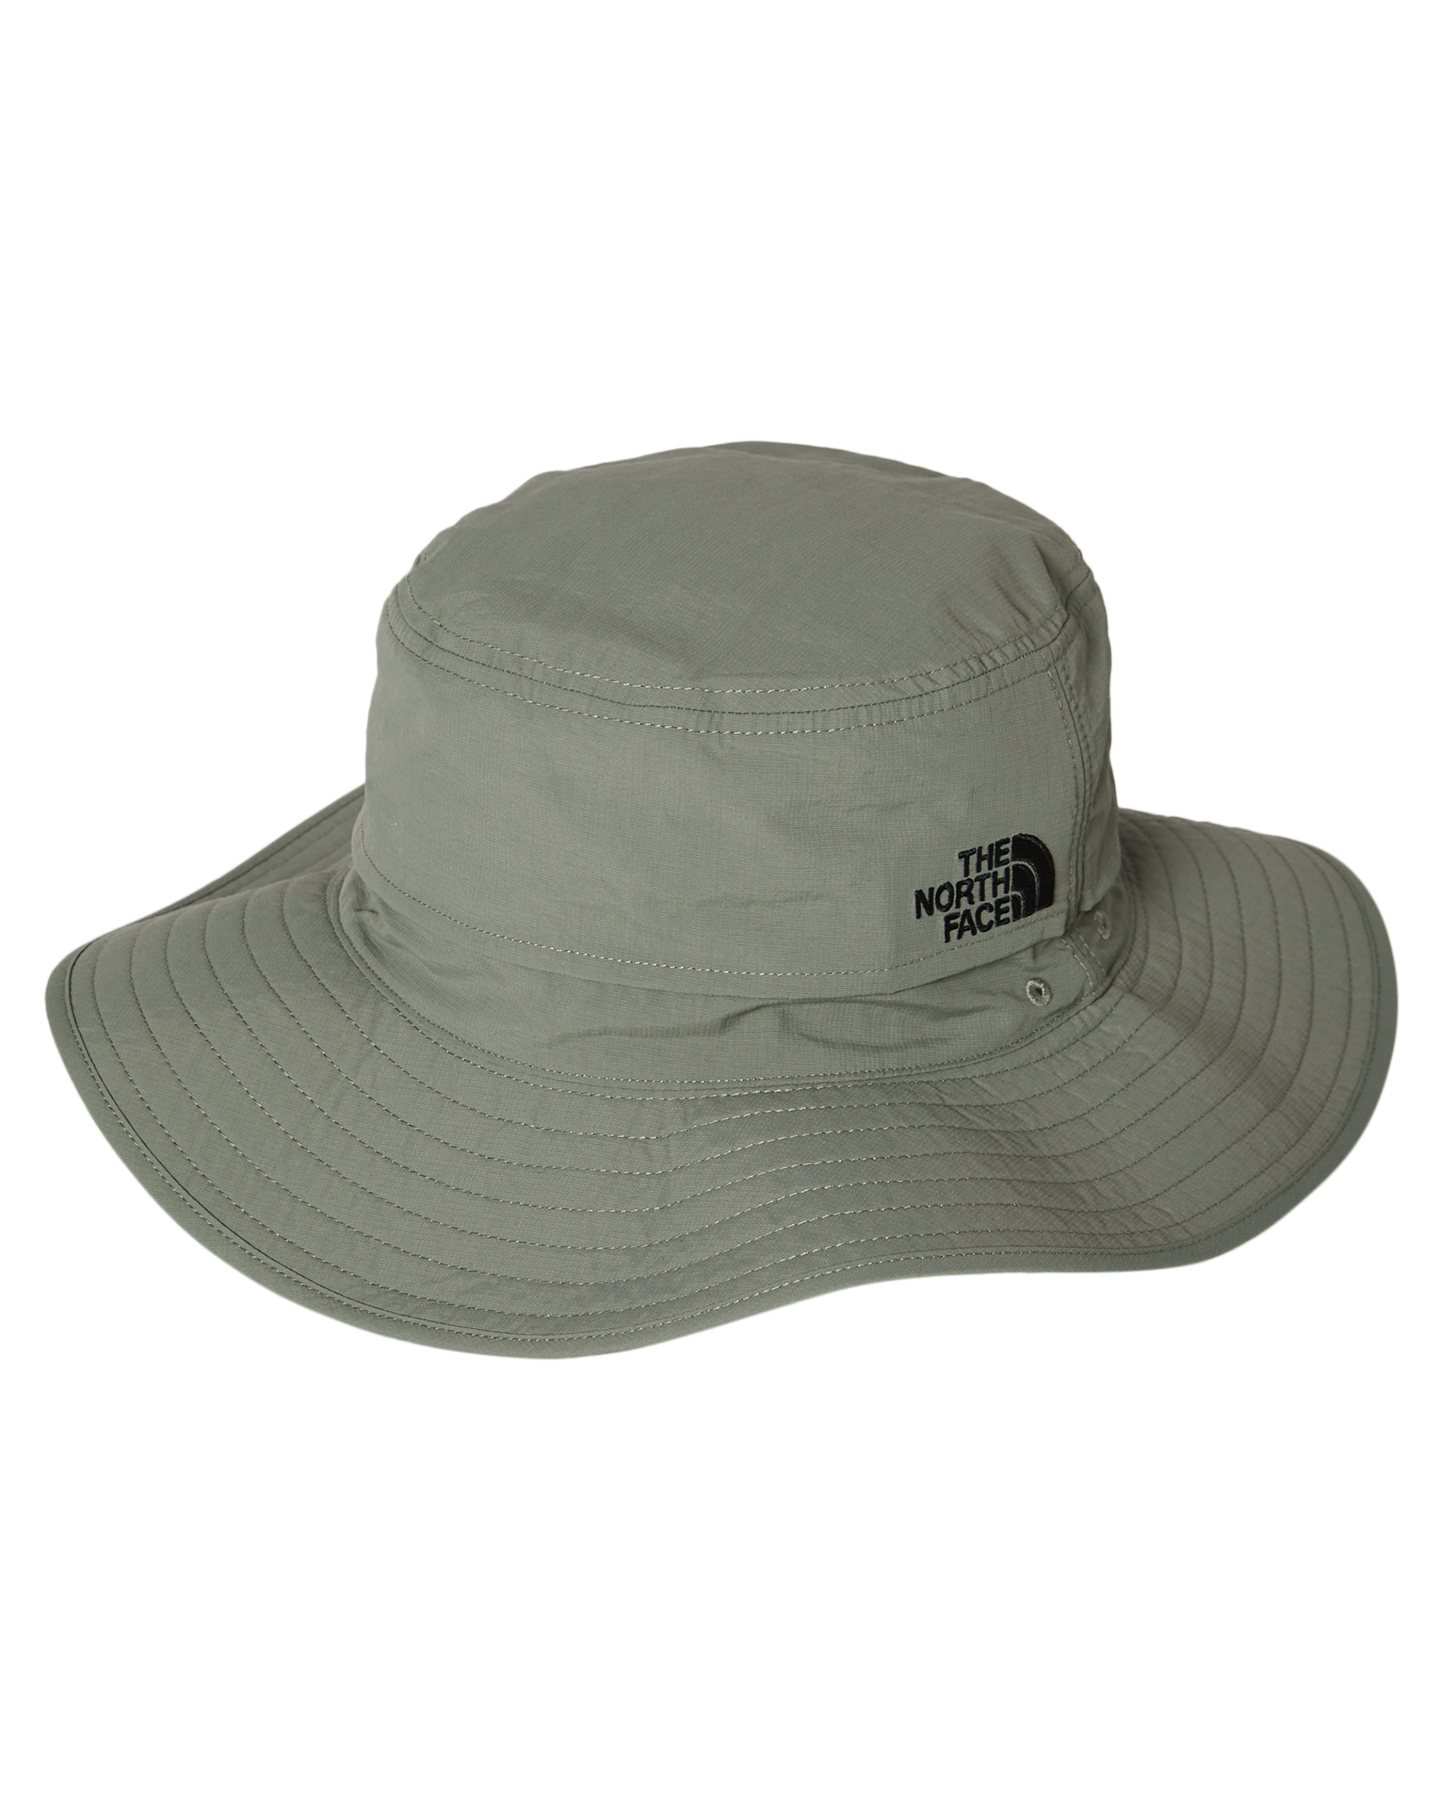 The North Face Horizon Breeze Brimmer Hat - Agave Green | SurfStitch